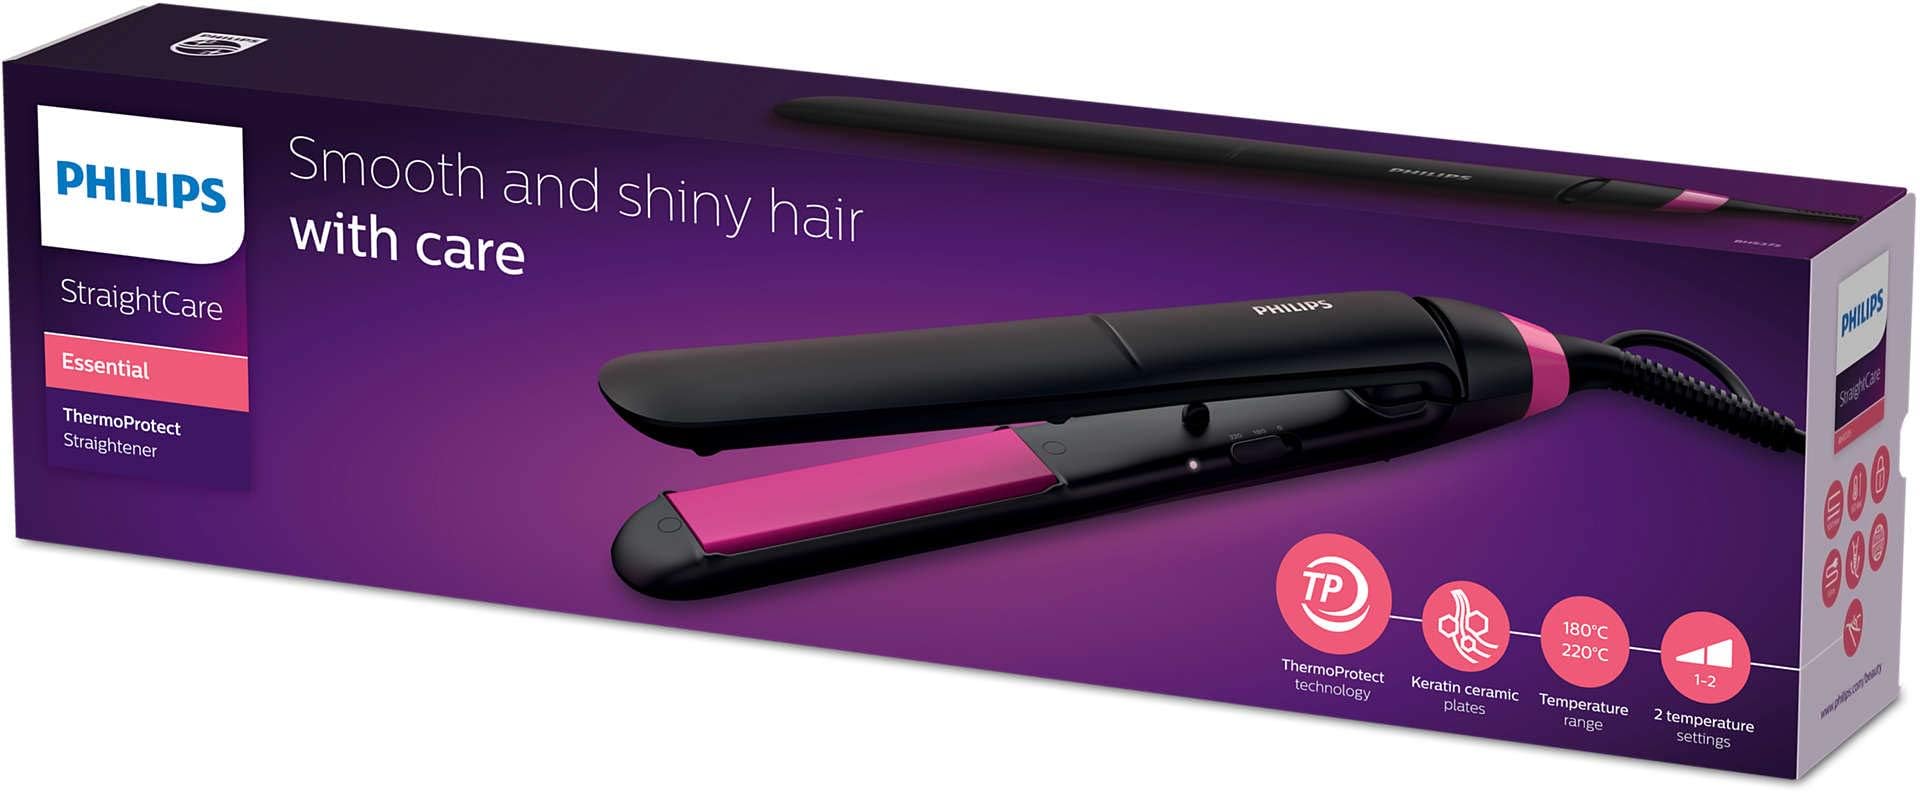 Philips StraightCare Essential ThermoProtect straightener. 2 temperature settings. Temperature range up to 220°C. 3 pin, BHS375/03.